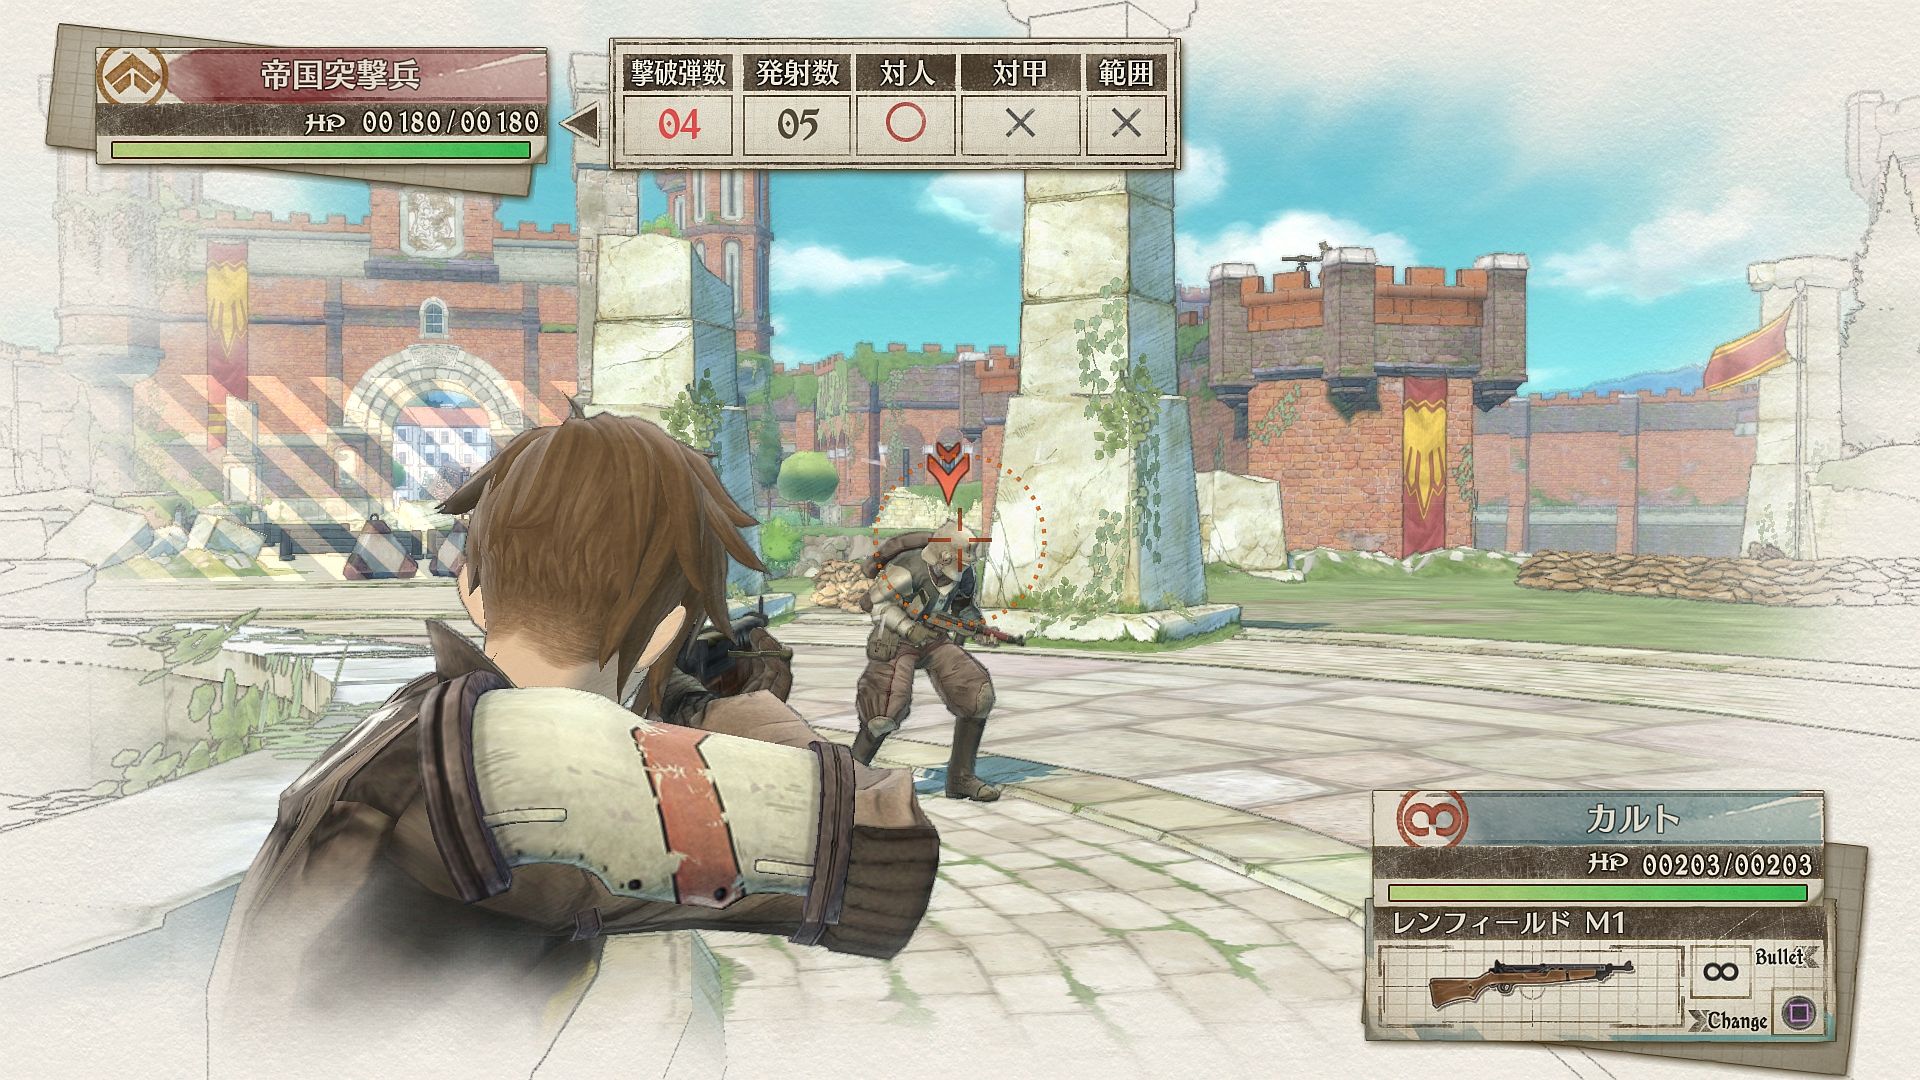 http://www.perfectly-nintendo.com/wp-content/gallery/valkyria-chronicles-4-27-12-2017/35.jpg